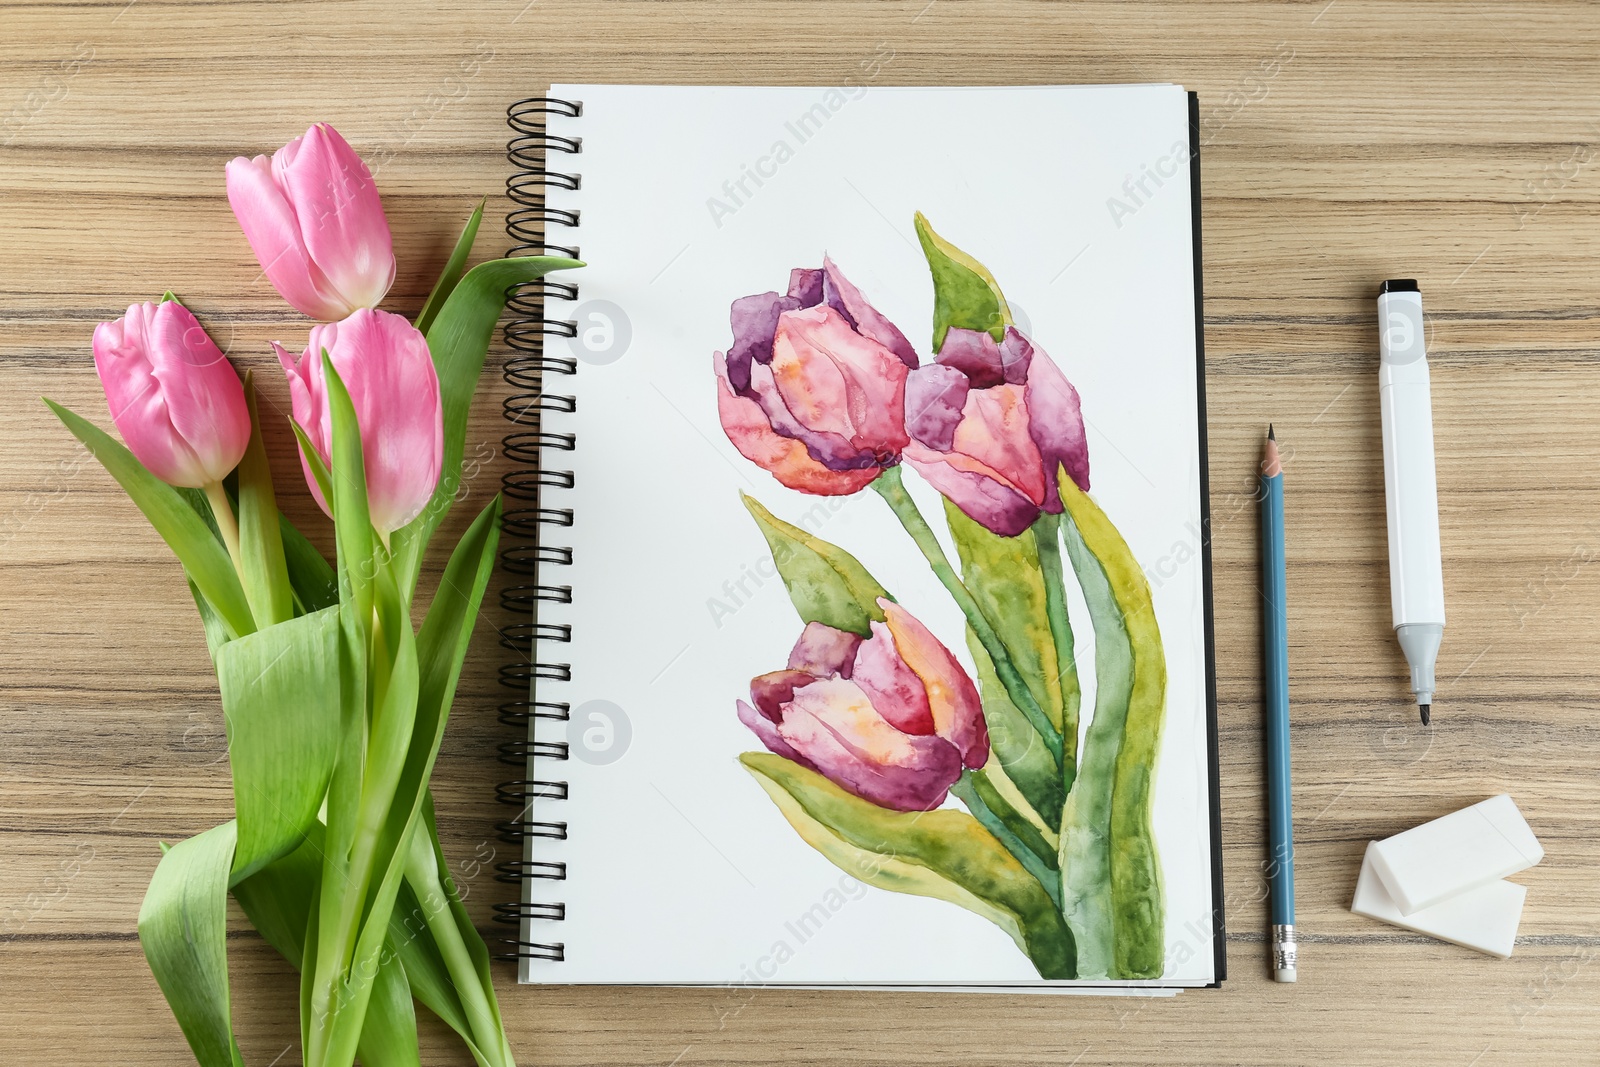 Photo of Painting of tulips in sketchbook, flowers and art supplies on wooden table, flat lay